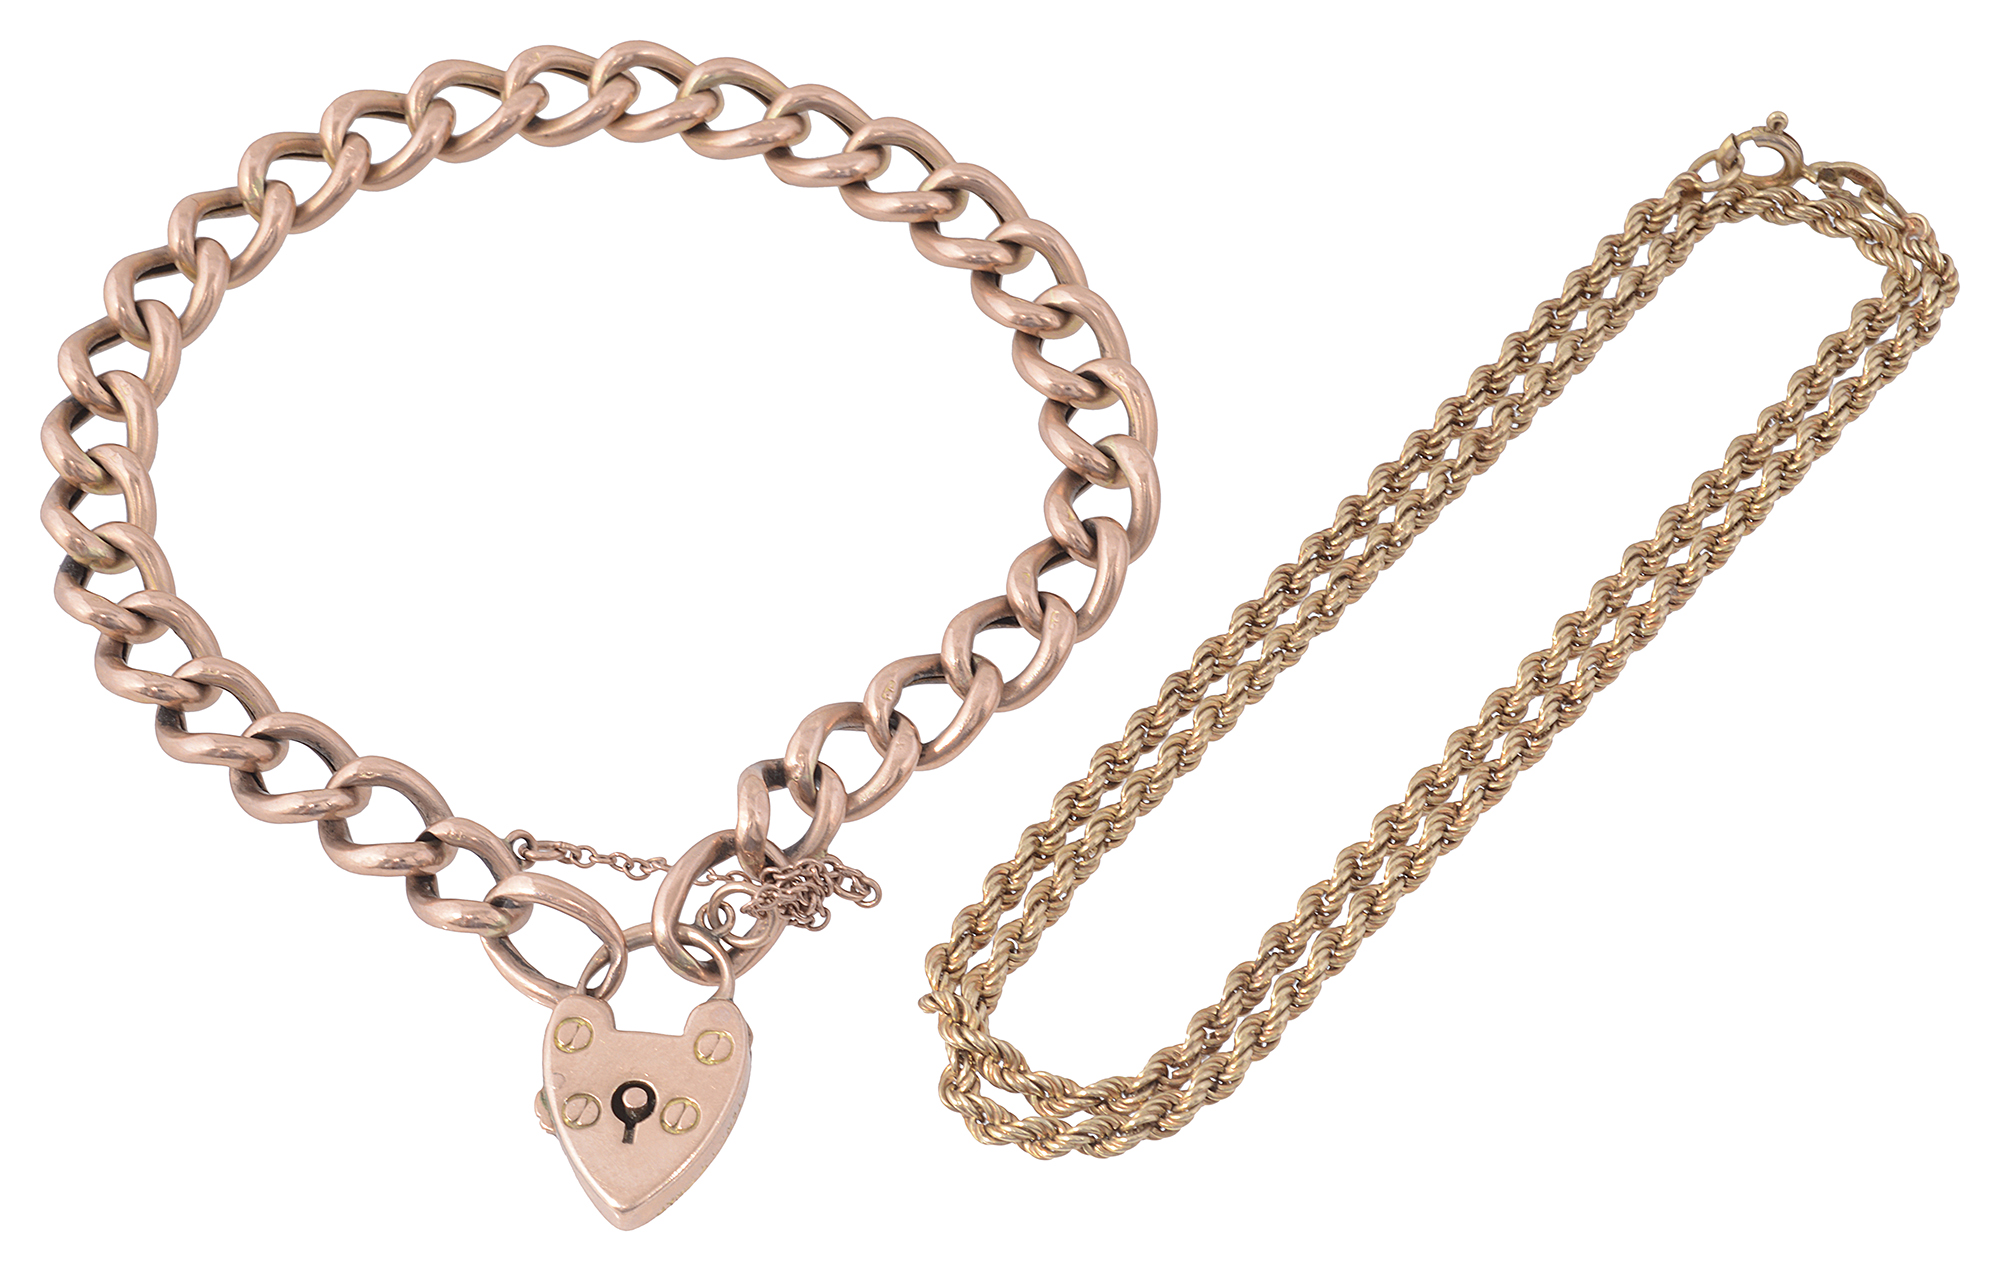 A 9ct rose coloured gold curb link bracelet together with a rope chain necklace